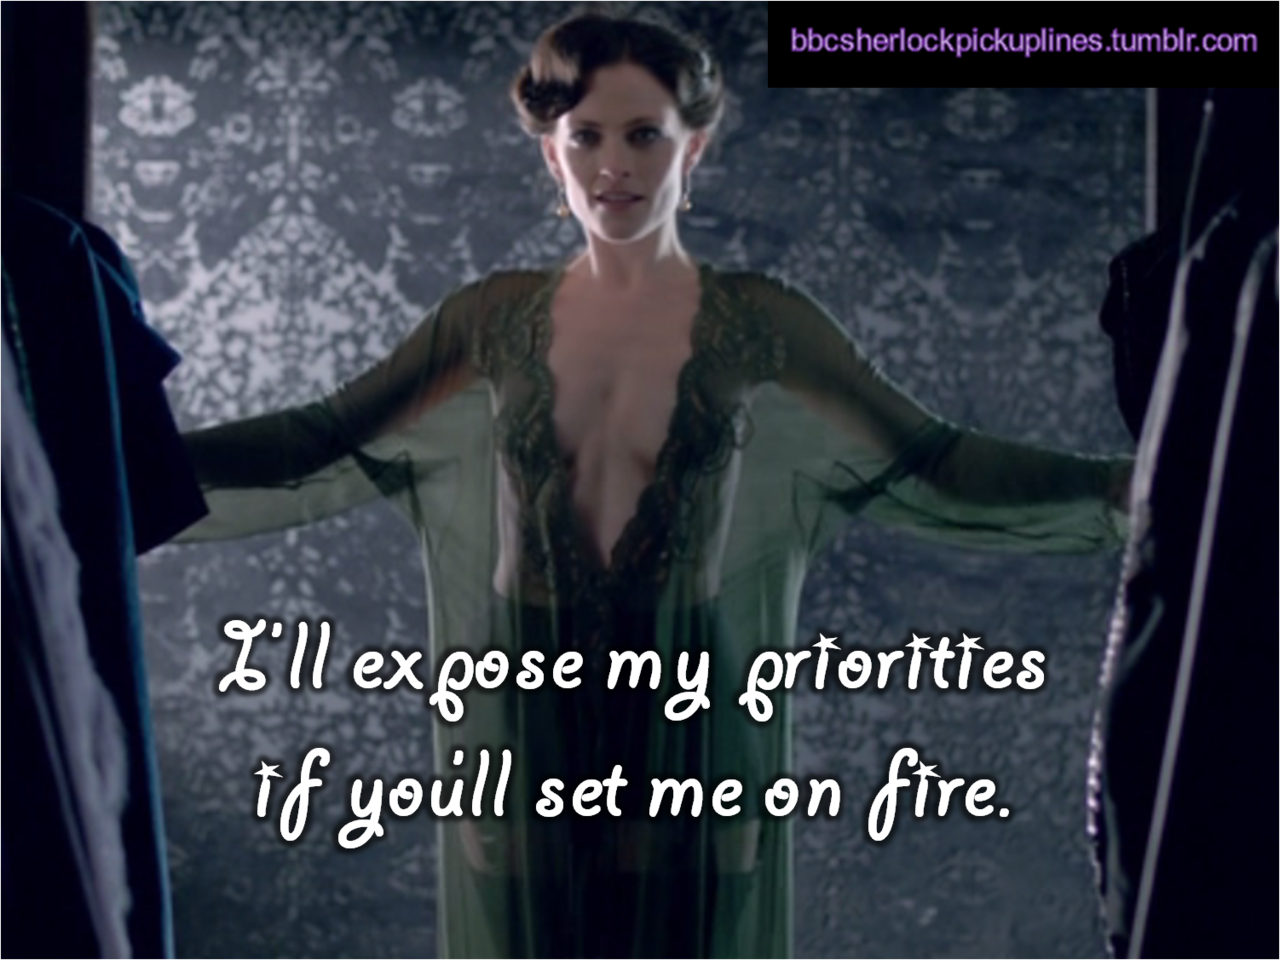 &ldquo;I&rsquo;ll expose my priorities if you&rsquo;ll set me on fire.&rdquo;